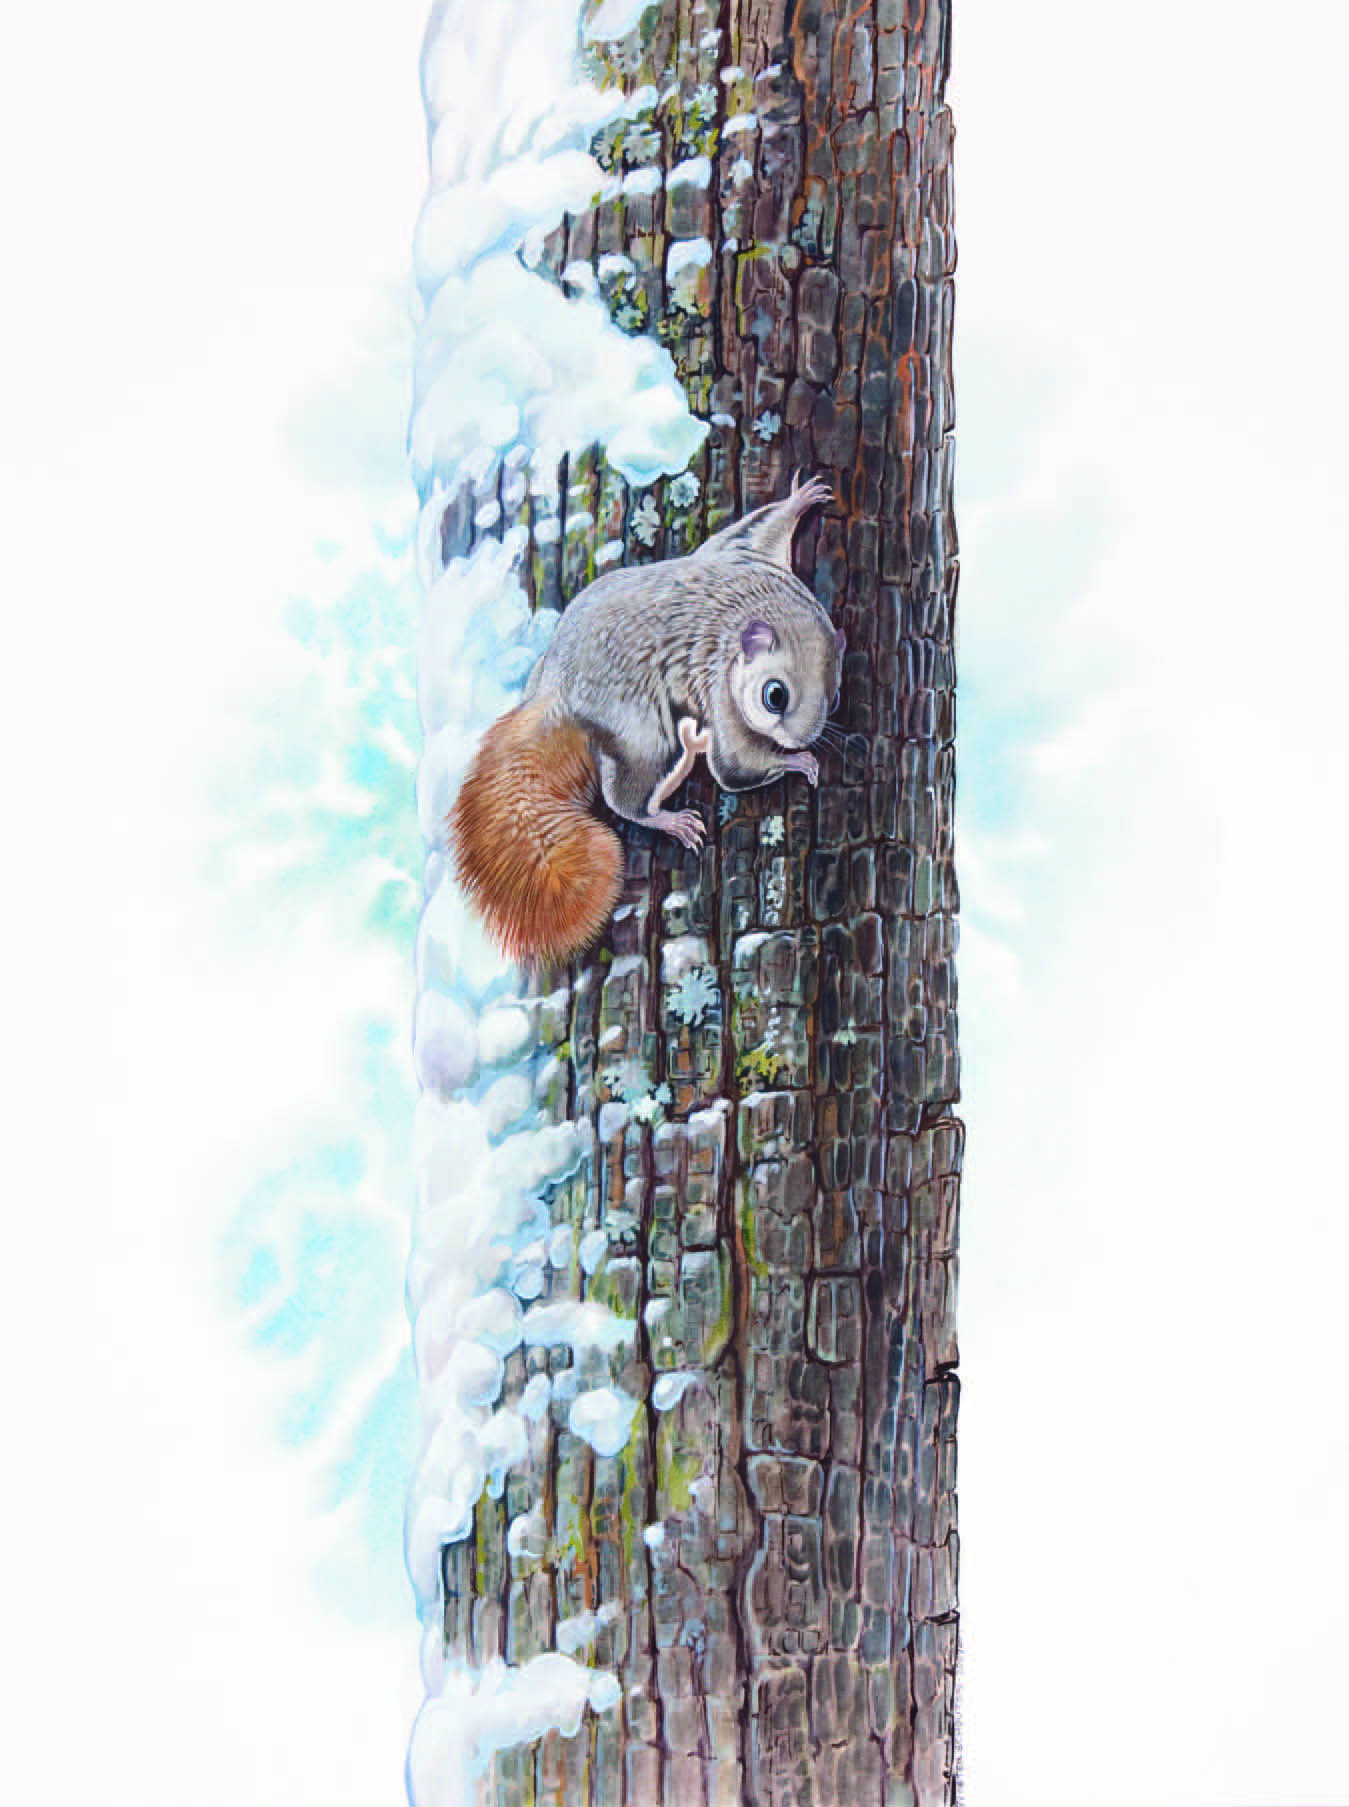 Siberian Flying Squirrel / Pteromys volans